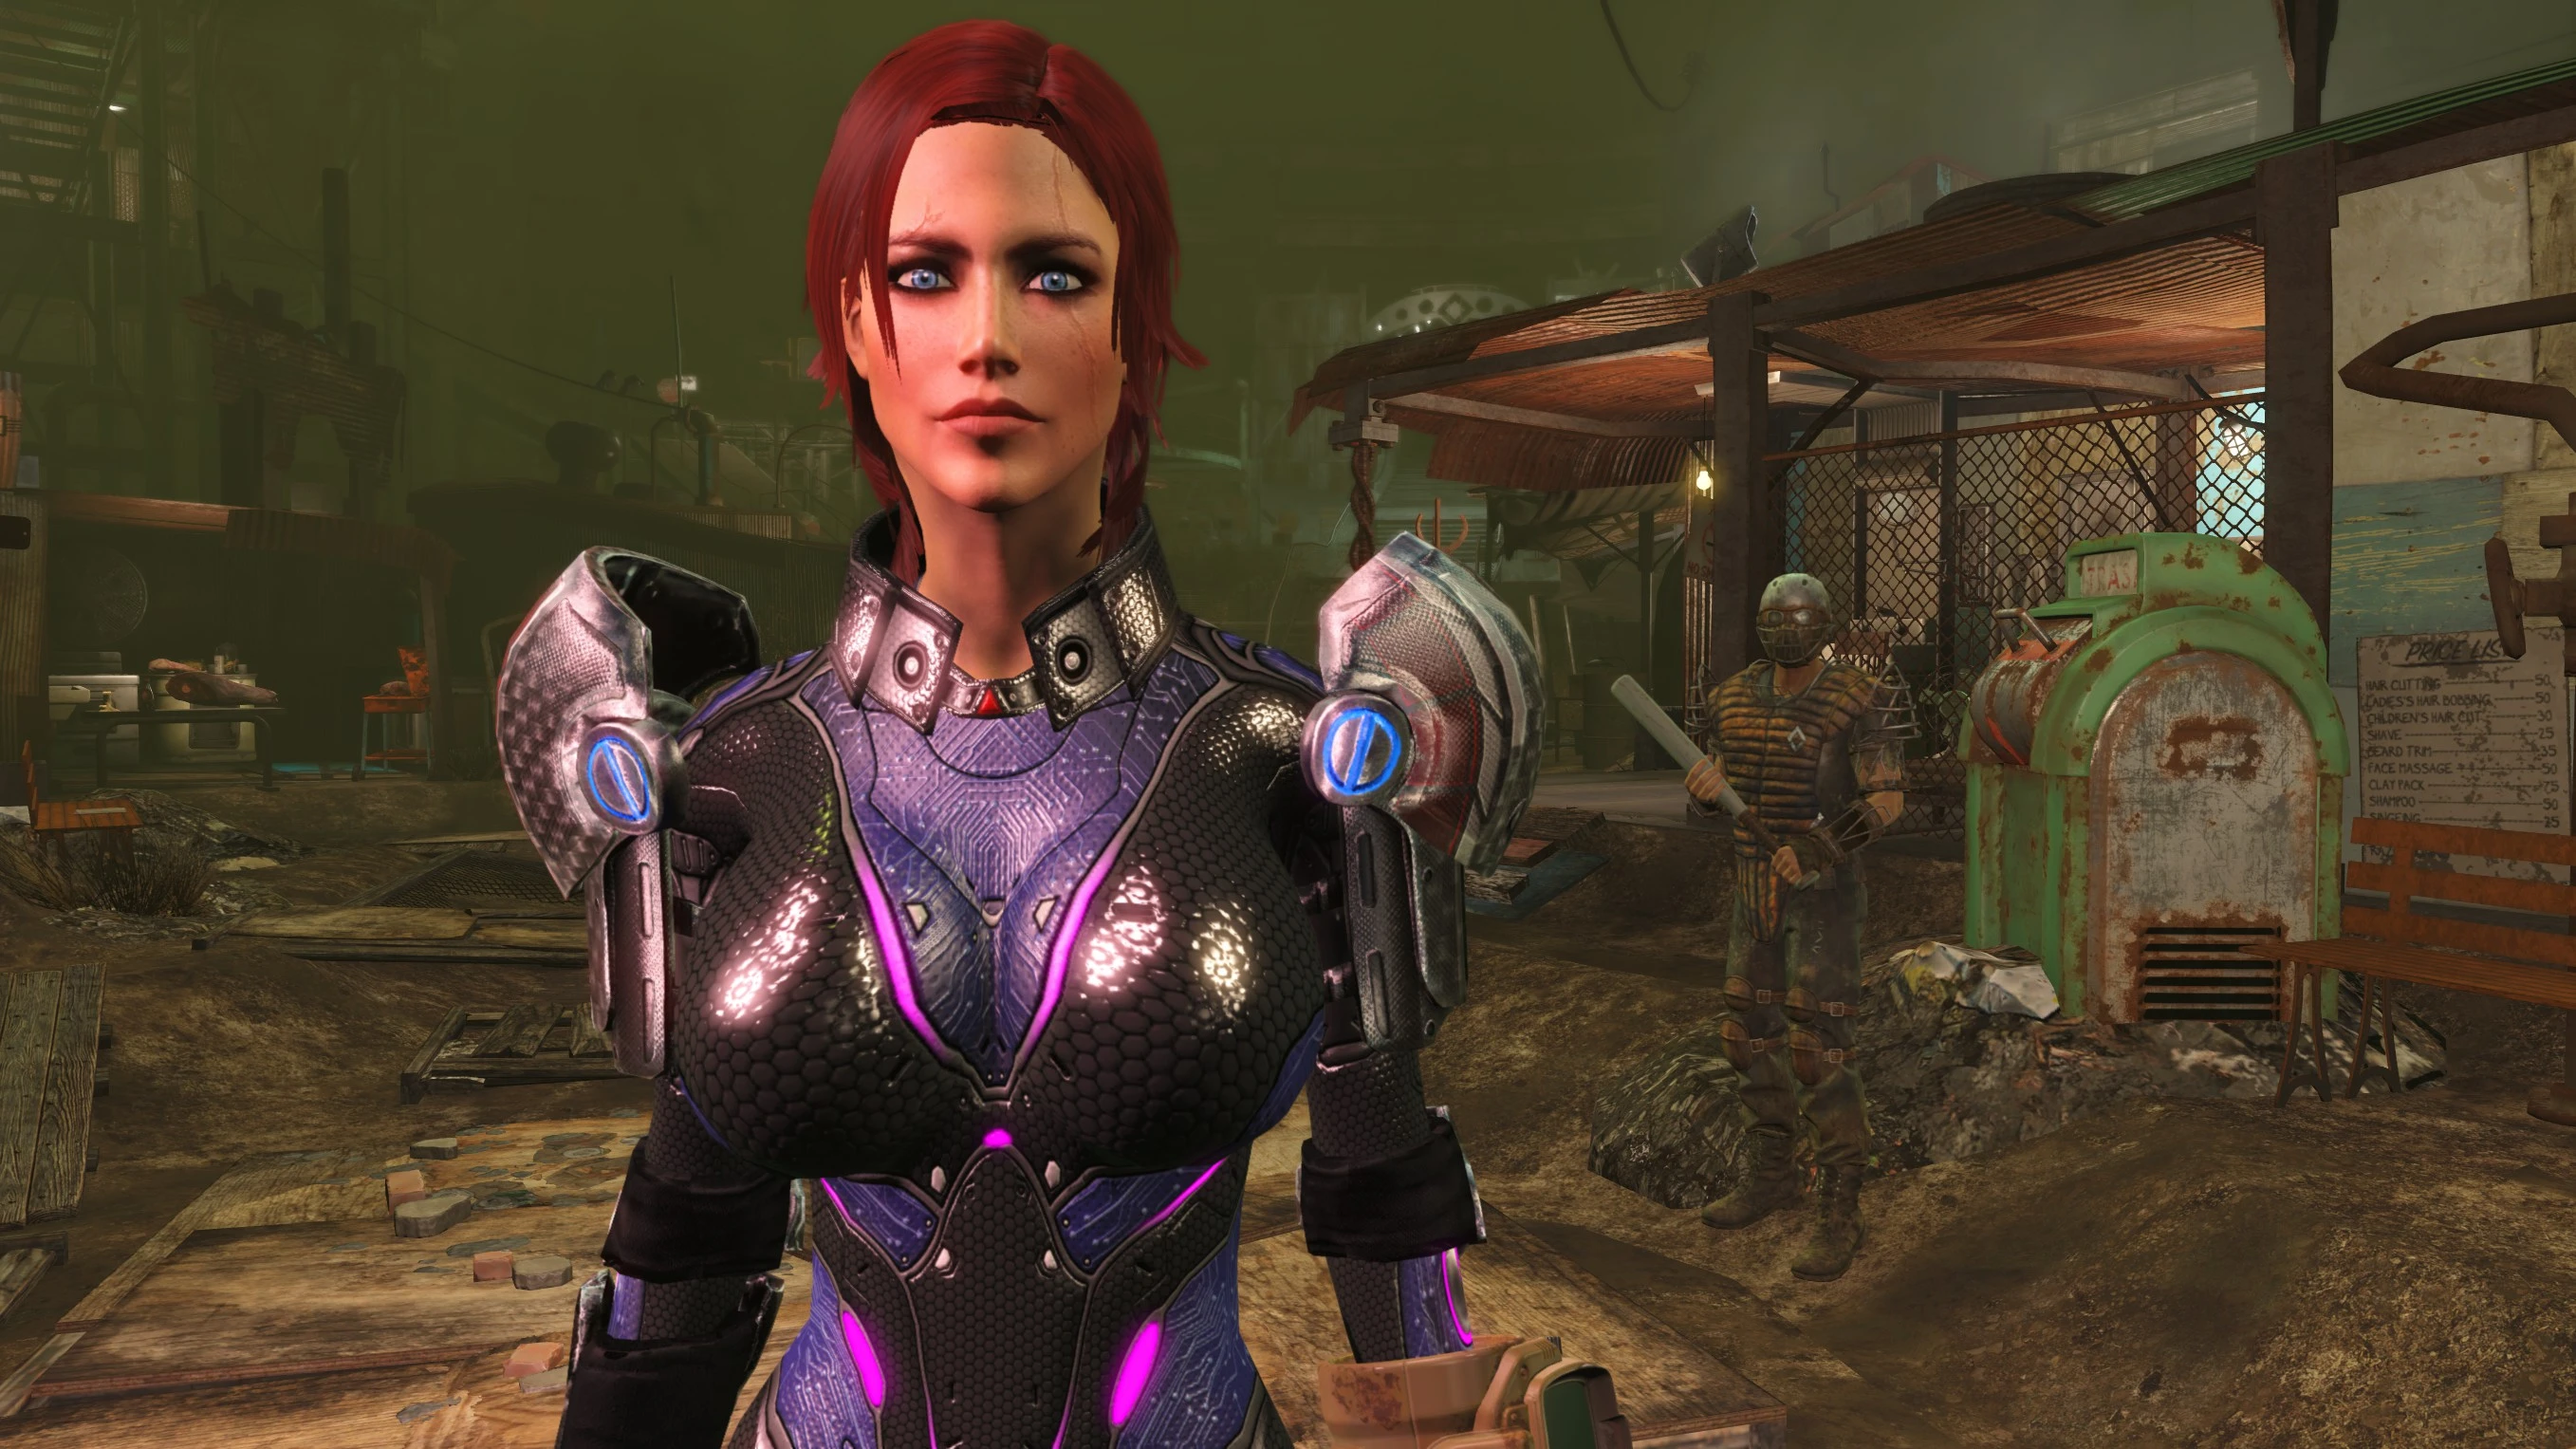 Laura at Fallout 4 Nexus - Mods and community